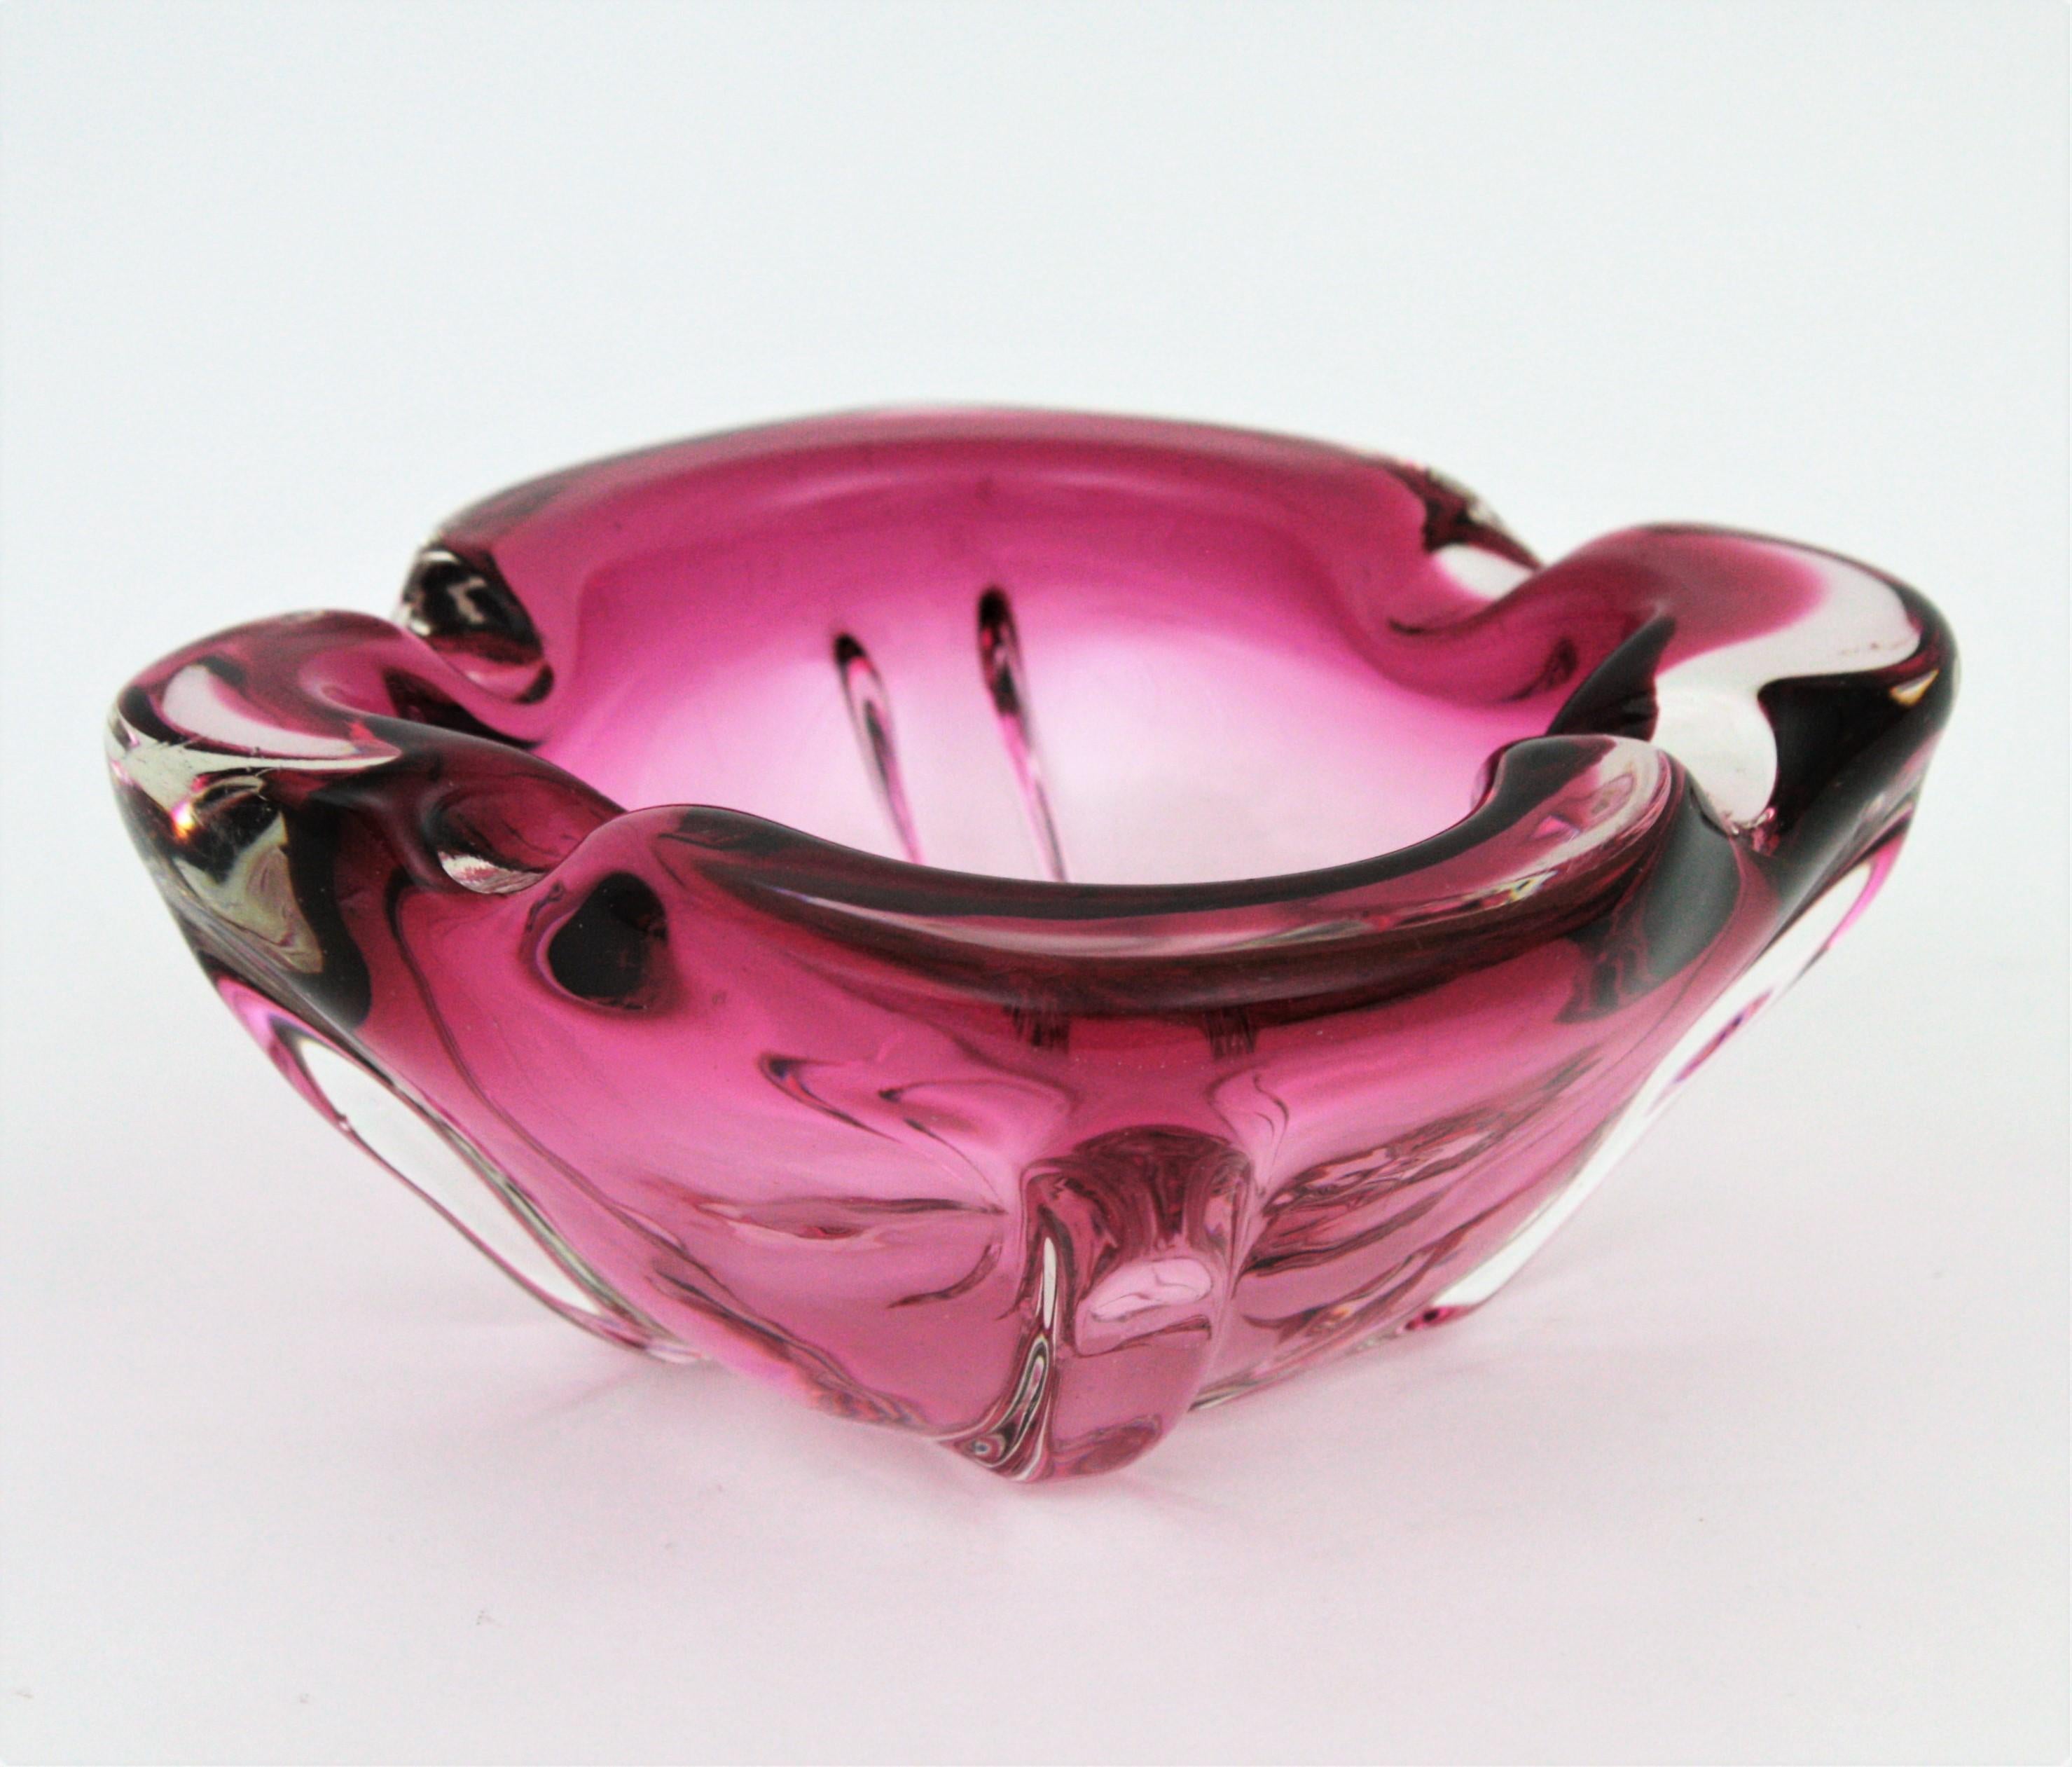 Lovely Murano glass Sommerdo decorative bowl or ashtray in pink and clear glass. Attributed to Seguso, Italy, 1960s.
This handblow art glass piece was handcrafted in shades of fuchsia to pink glass submerged into clear glass. It has a nice design